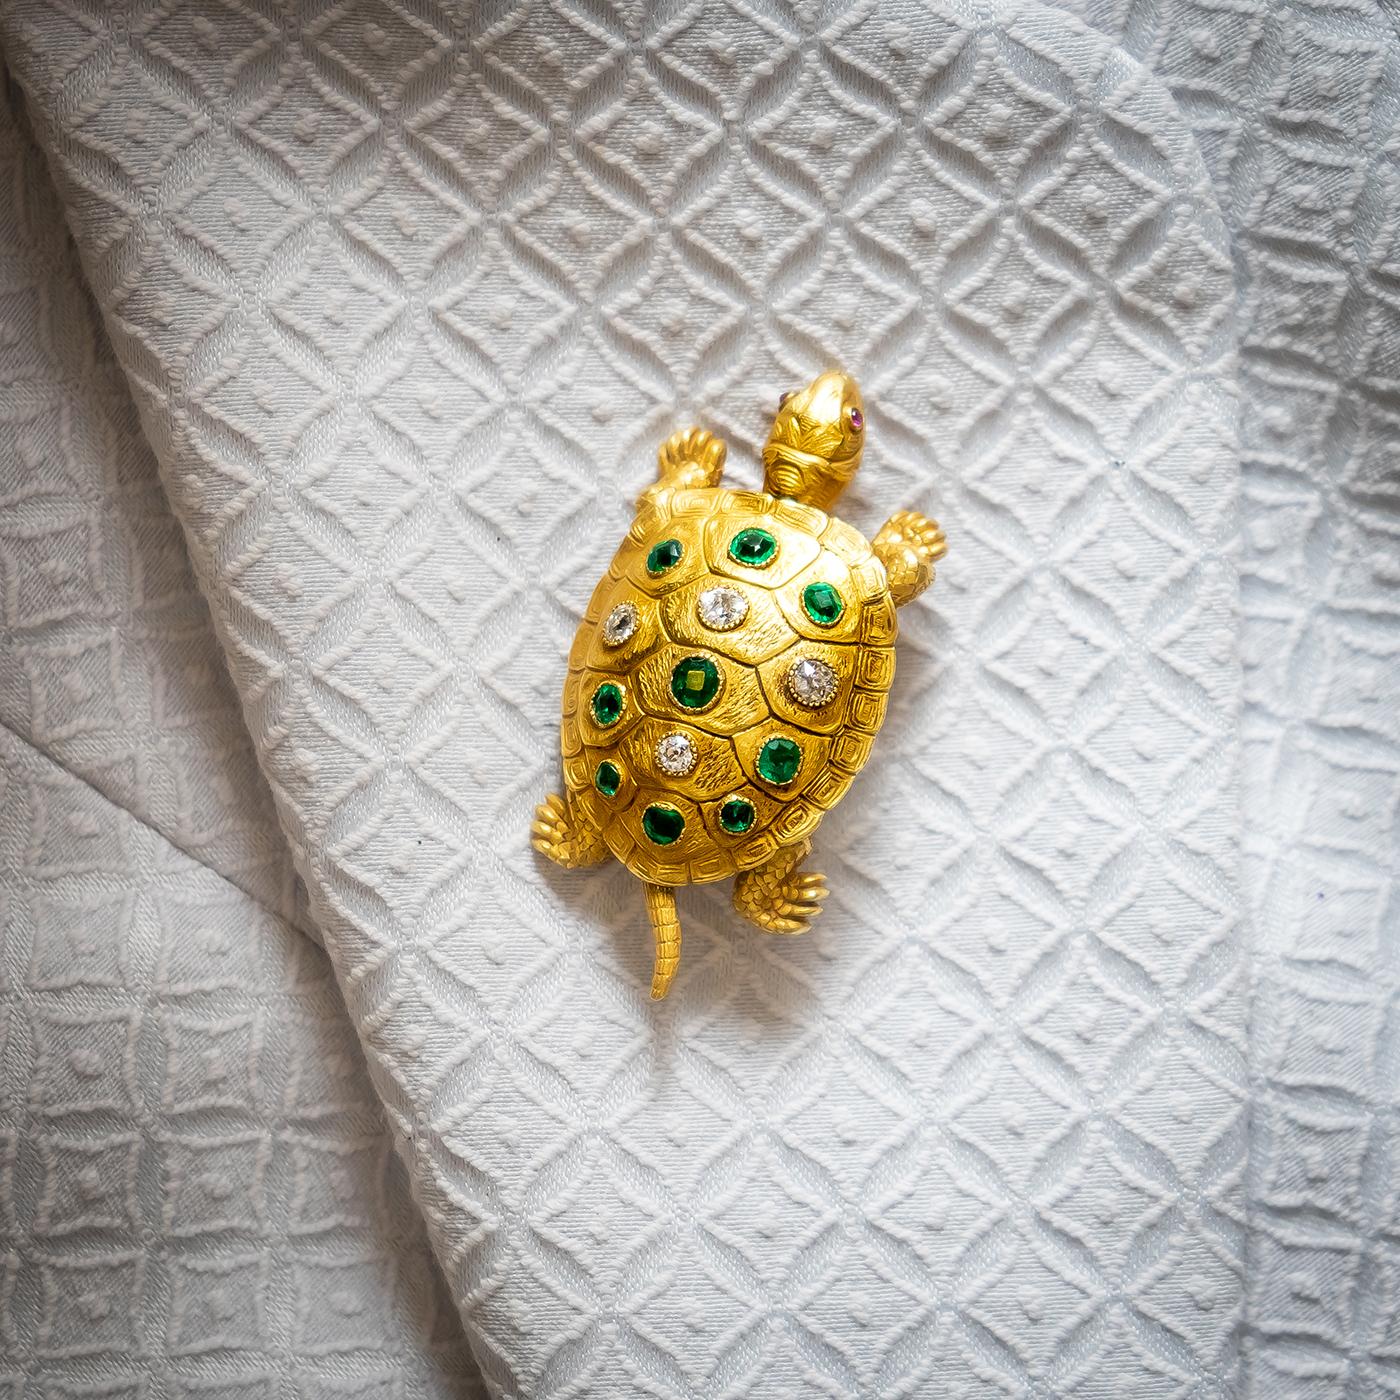 A French turtle brooch, by Edmond Plisson, with sprung moving head, legs and tail, the shell is set with cushion shaped emeralds and old-cut diamonds, in millegrain edged rub over settings, mounted in 18ct gold, engraved to represent the shell and